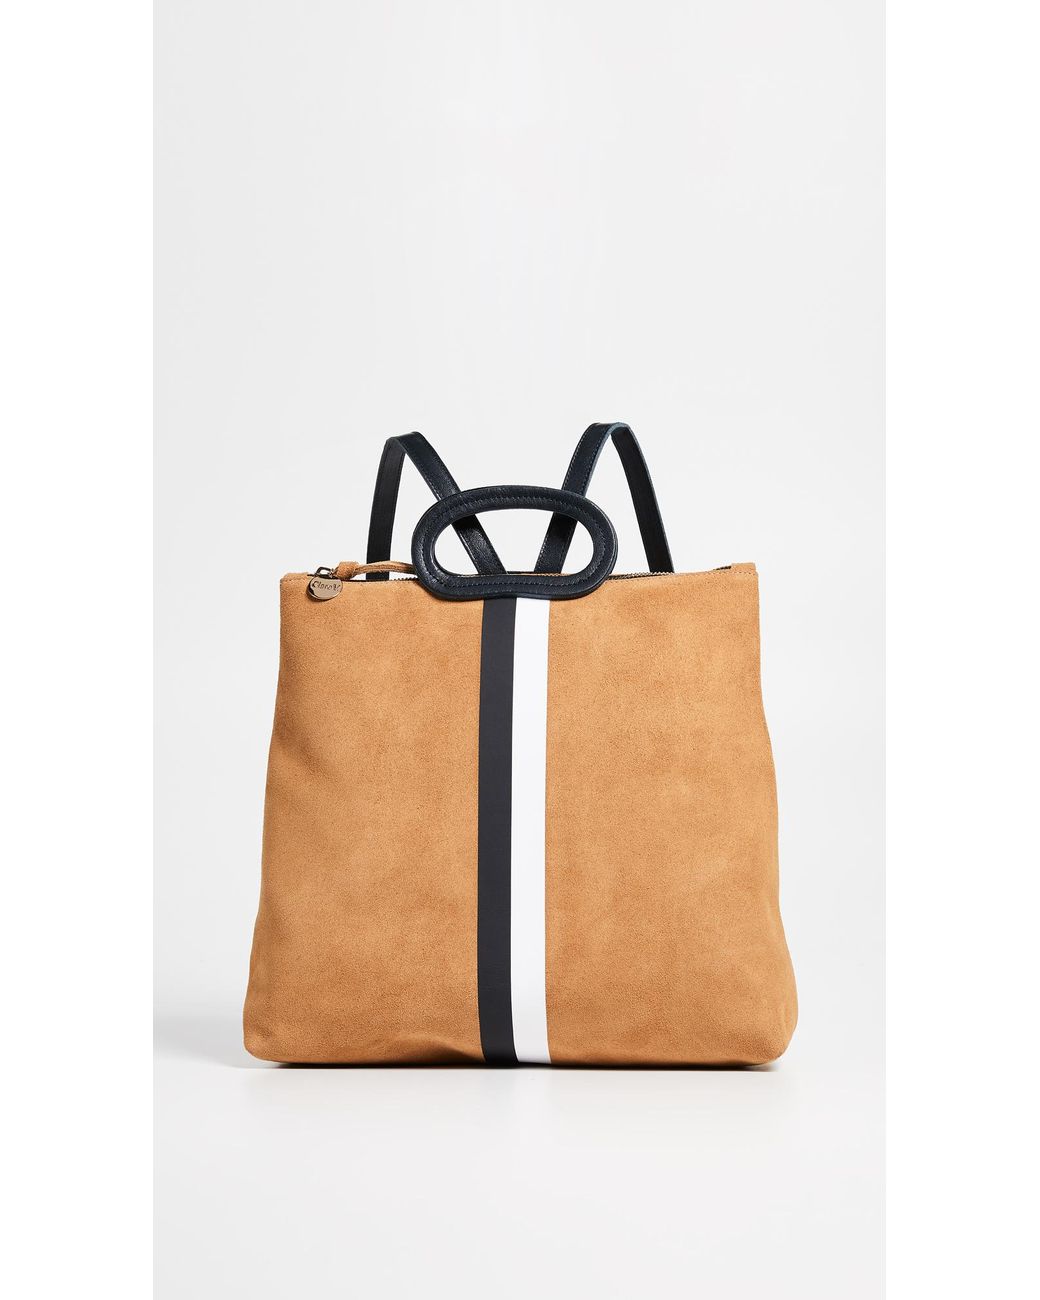 Good Neighbour  Clare V. Marcelle Backpack (Army Suede)